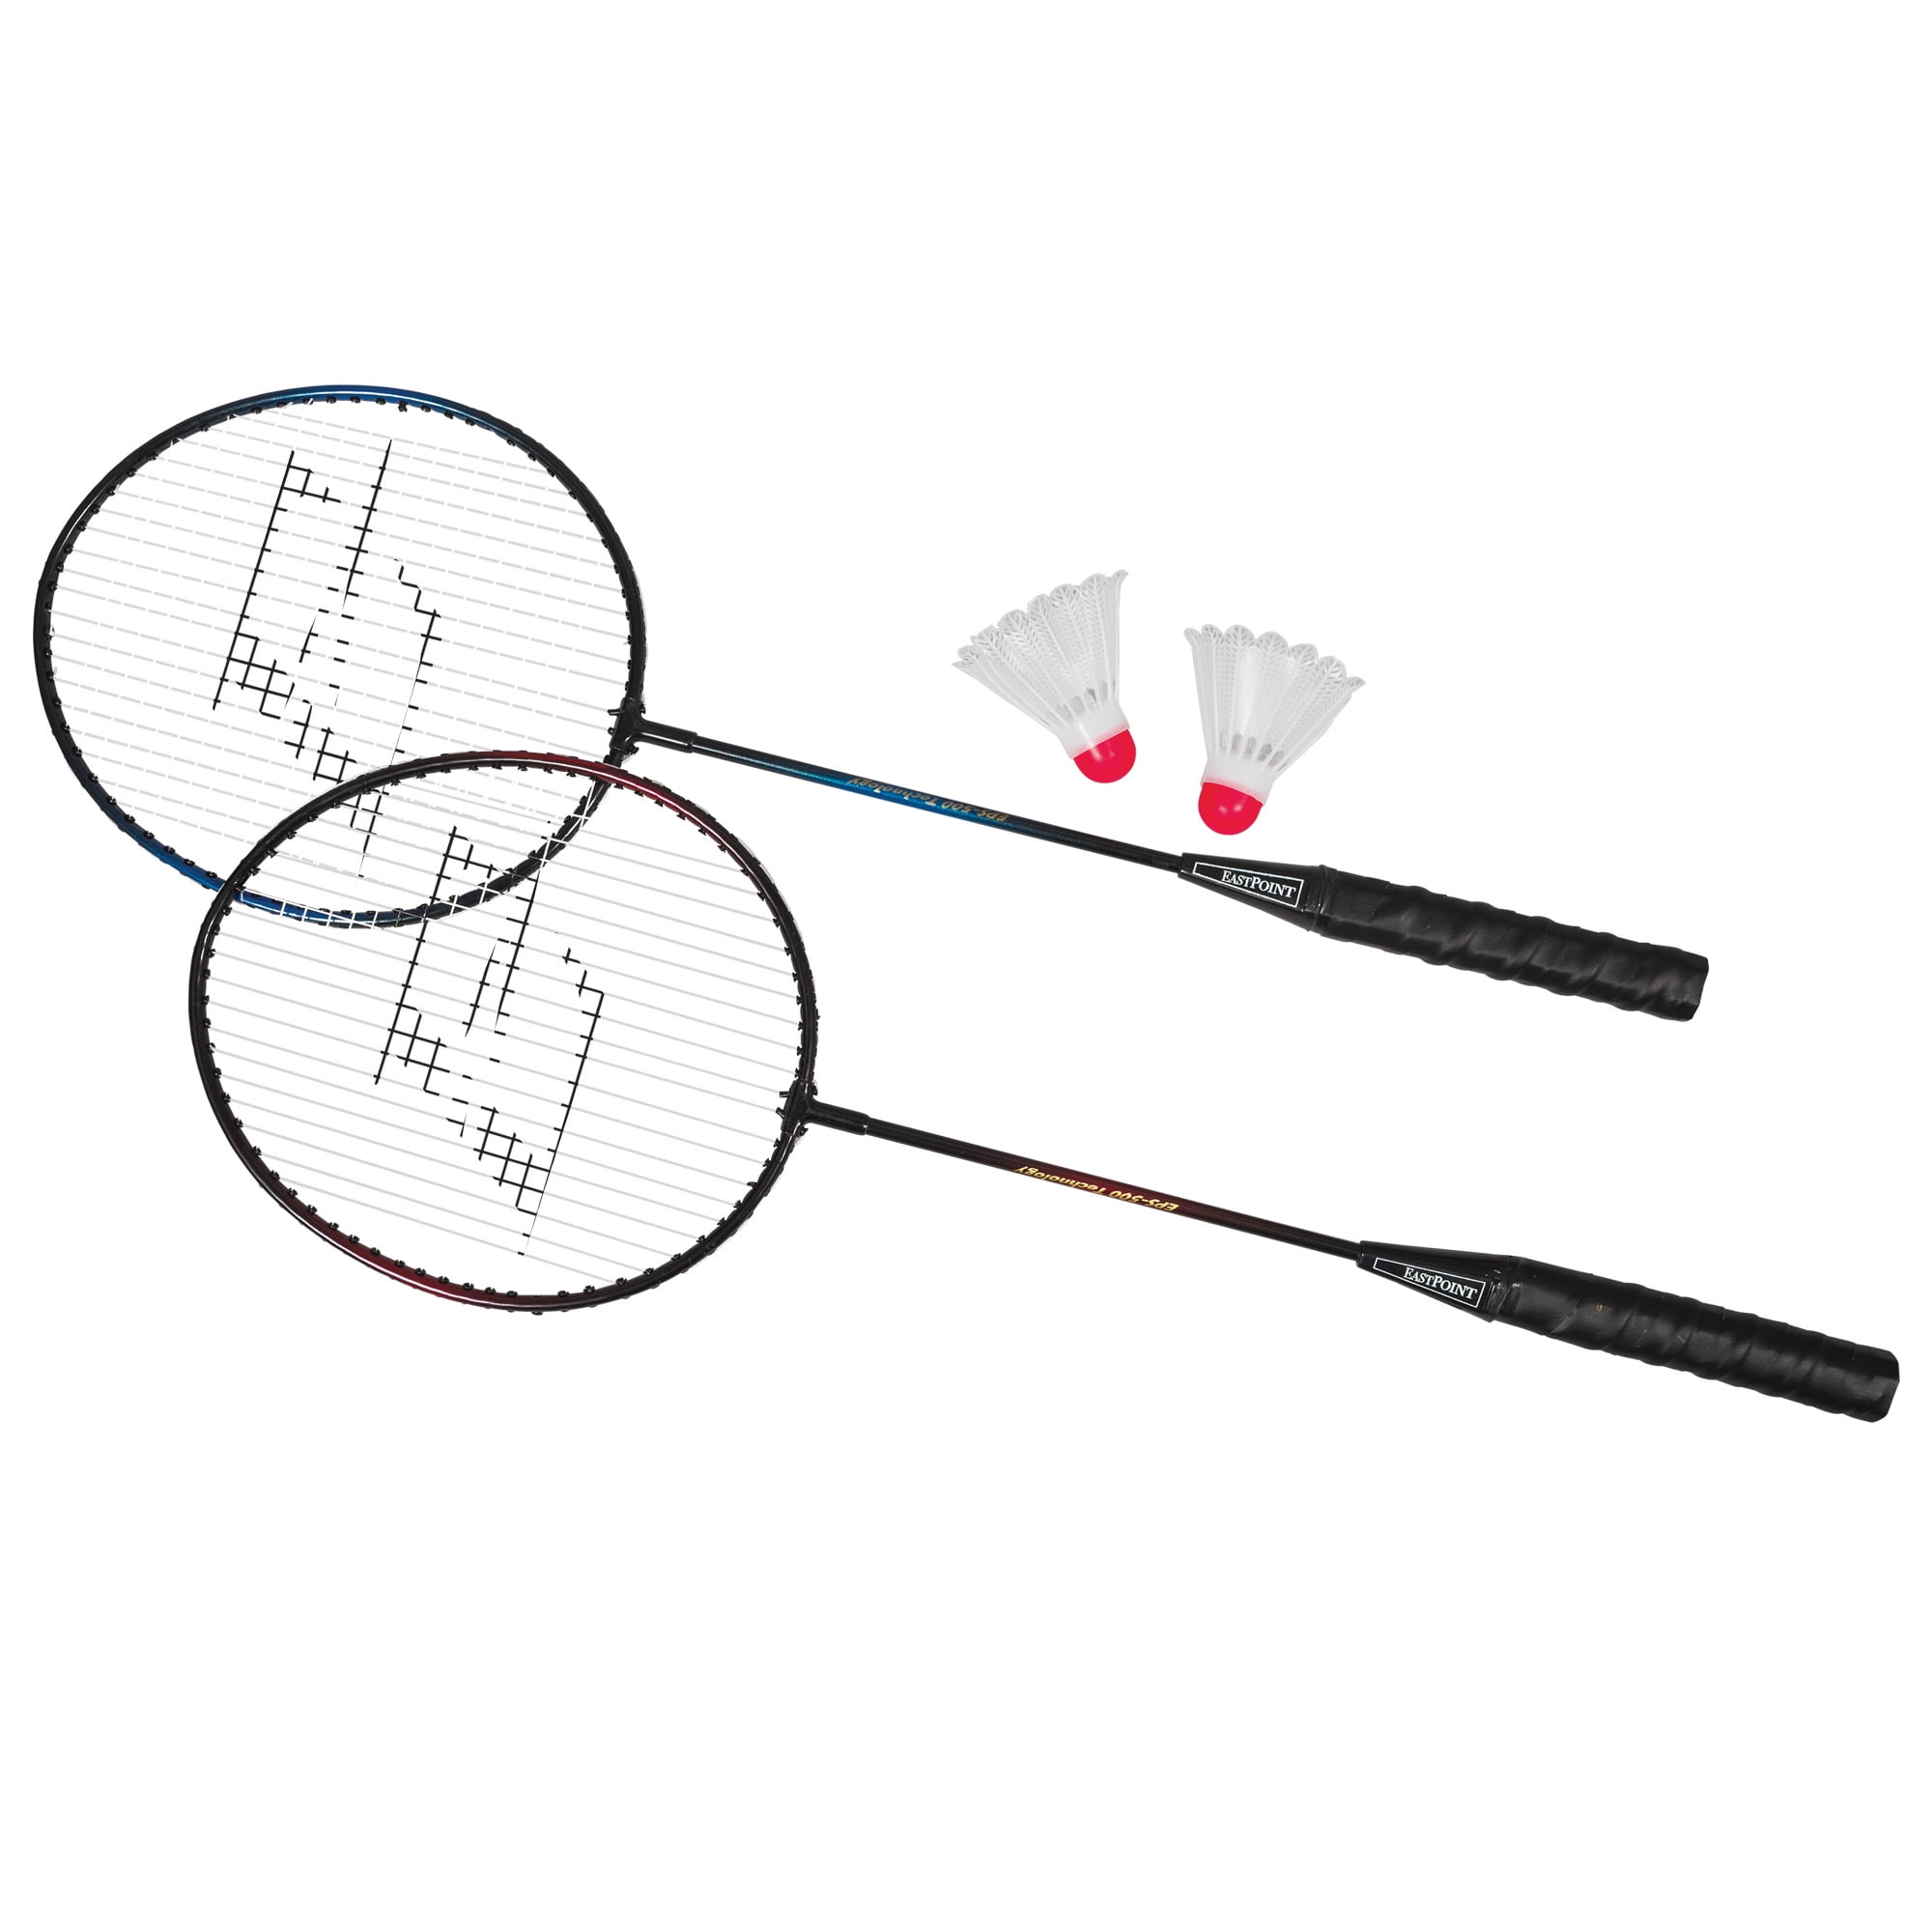 2-Player Badminton Set With Rackets & Shuttles Combos Set For Children 2 Colors 